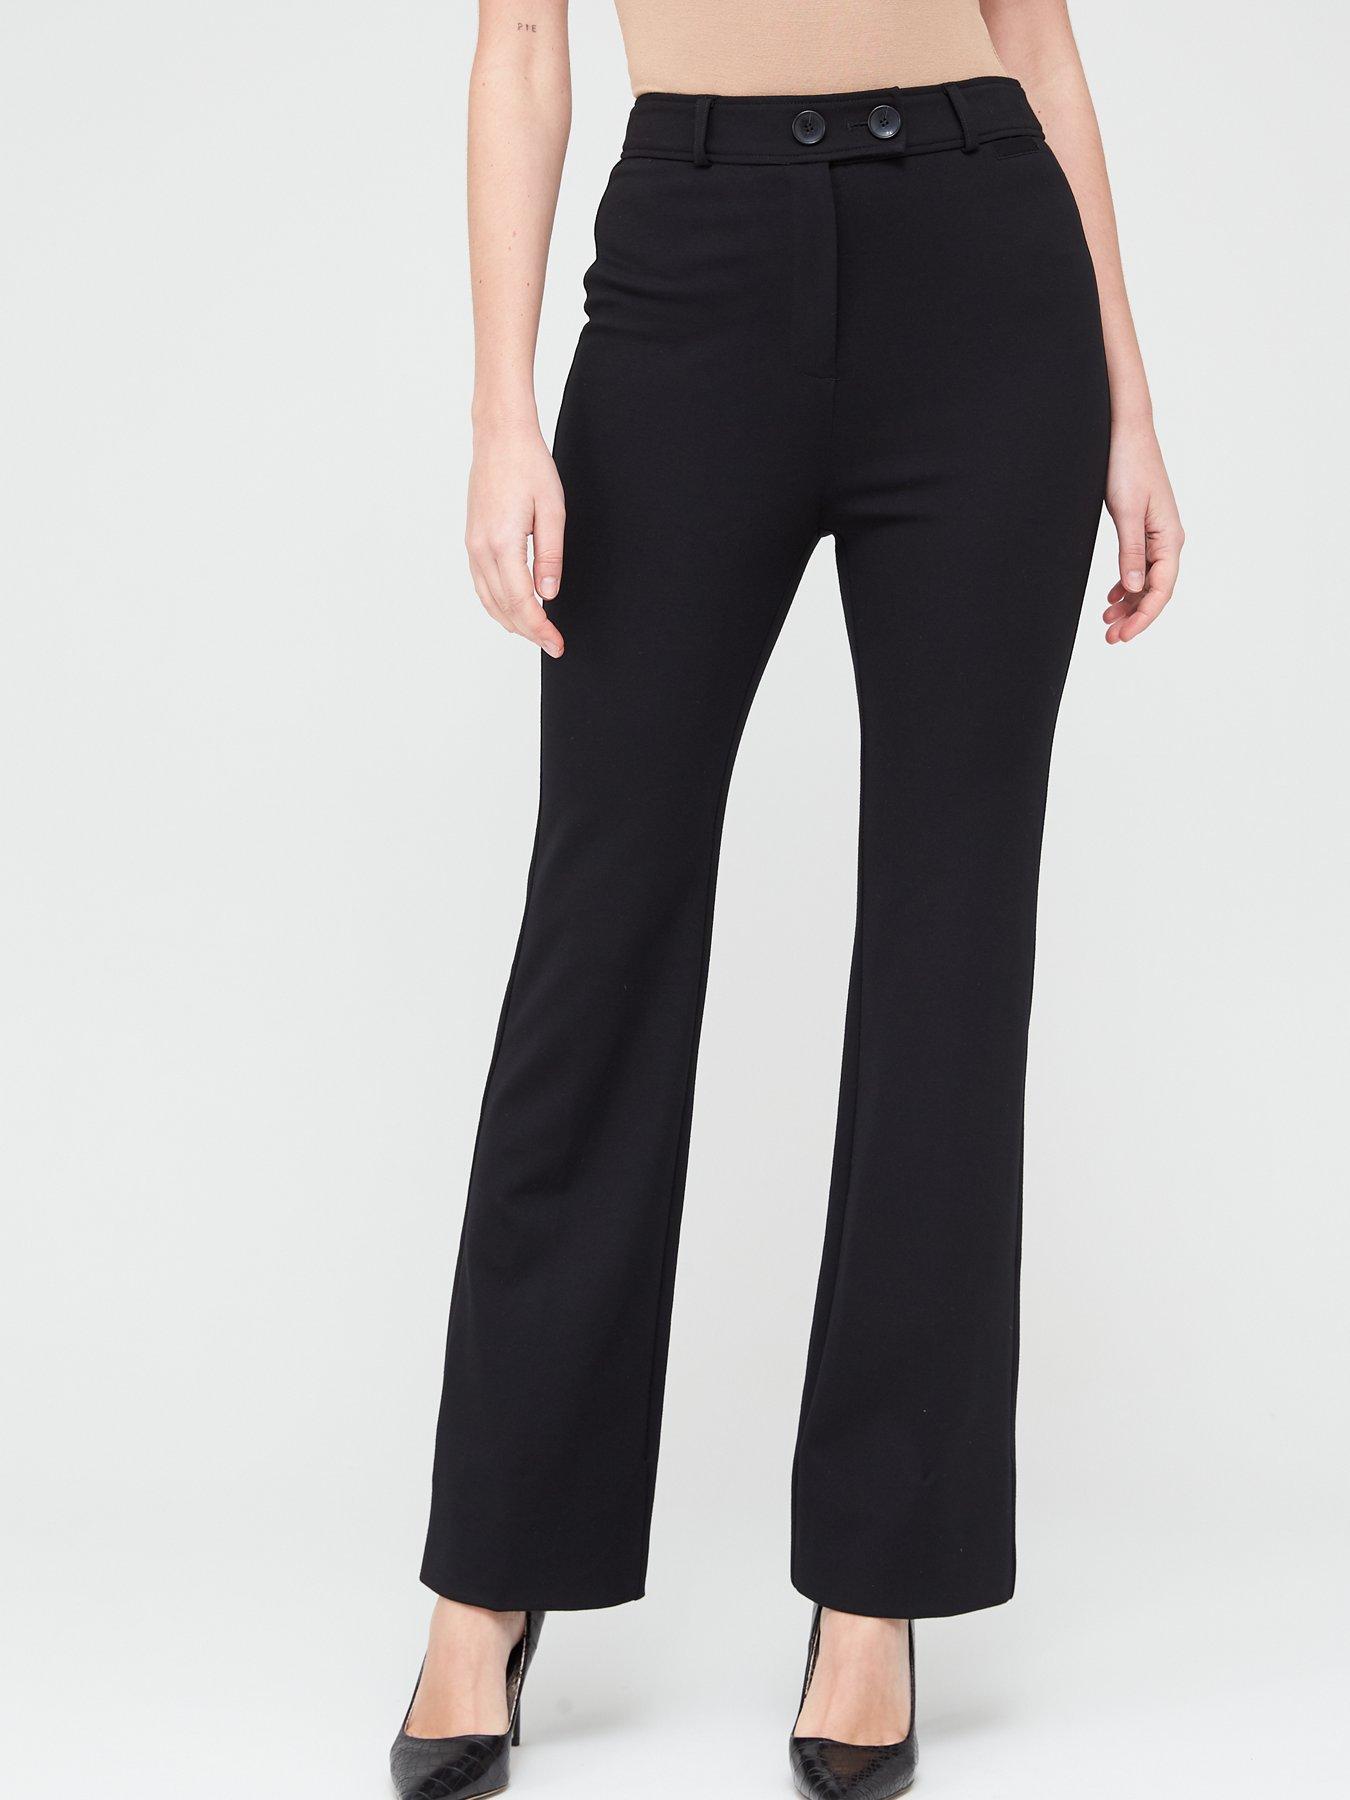 Petite Trousers | Petite Trousers for Women - Littlewoods